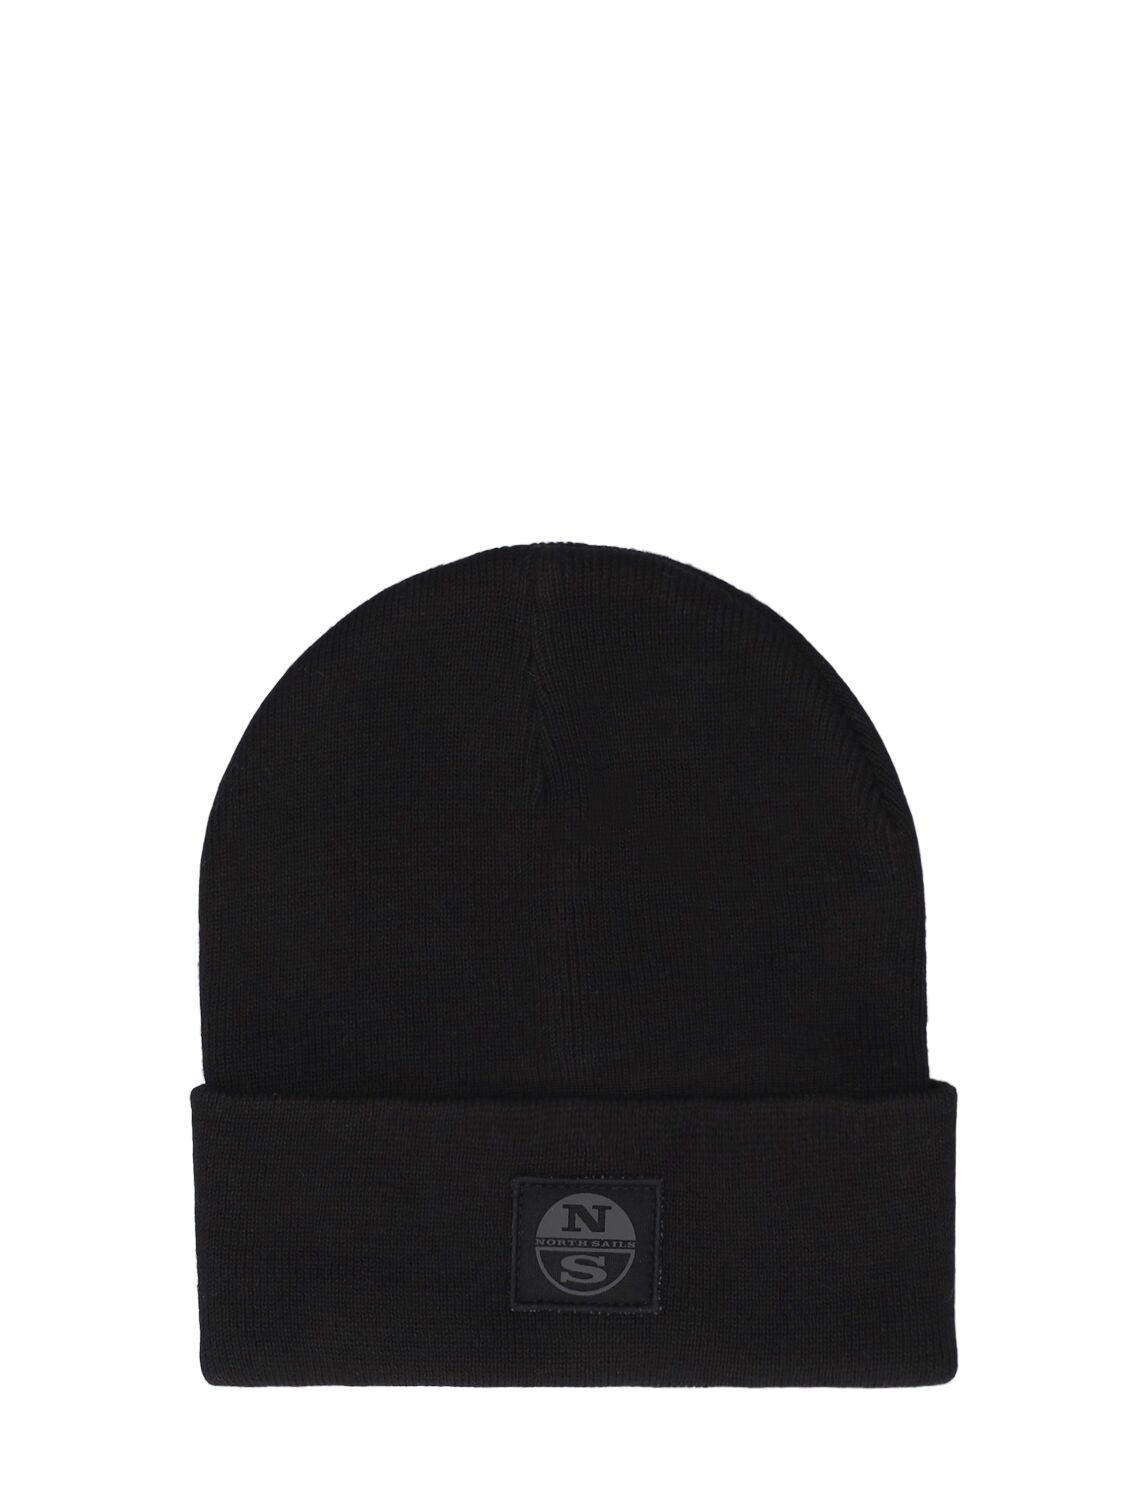 Image of Cotton Blend Beanie